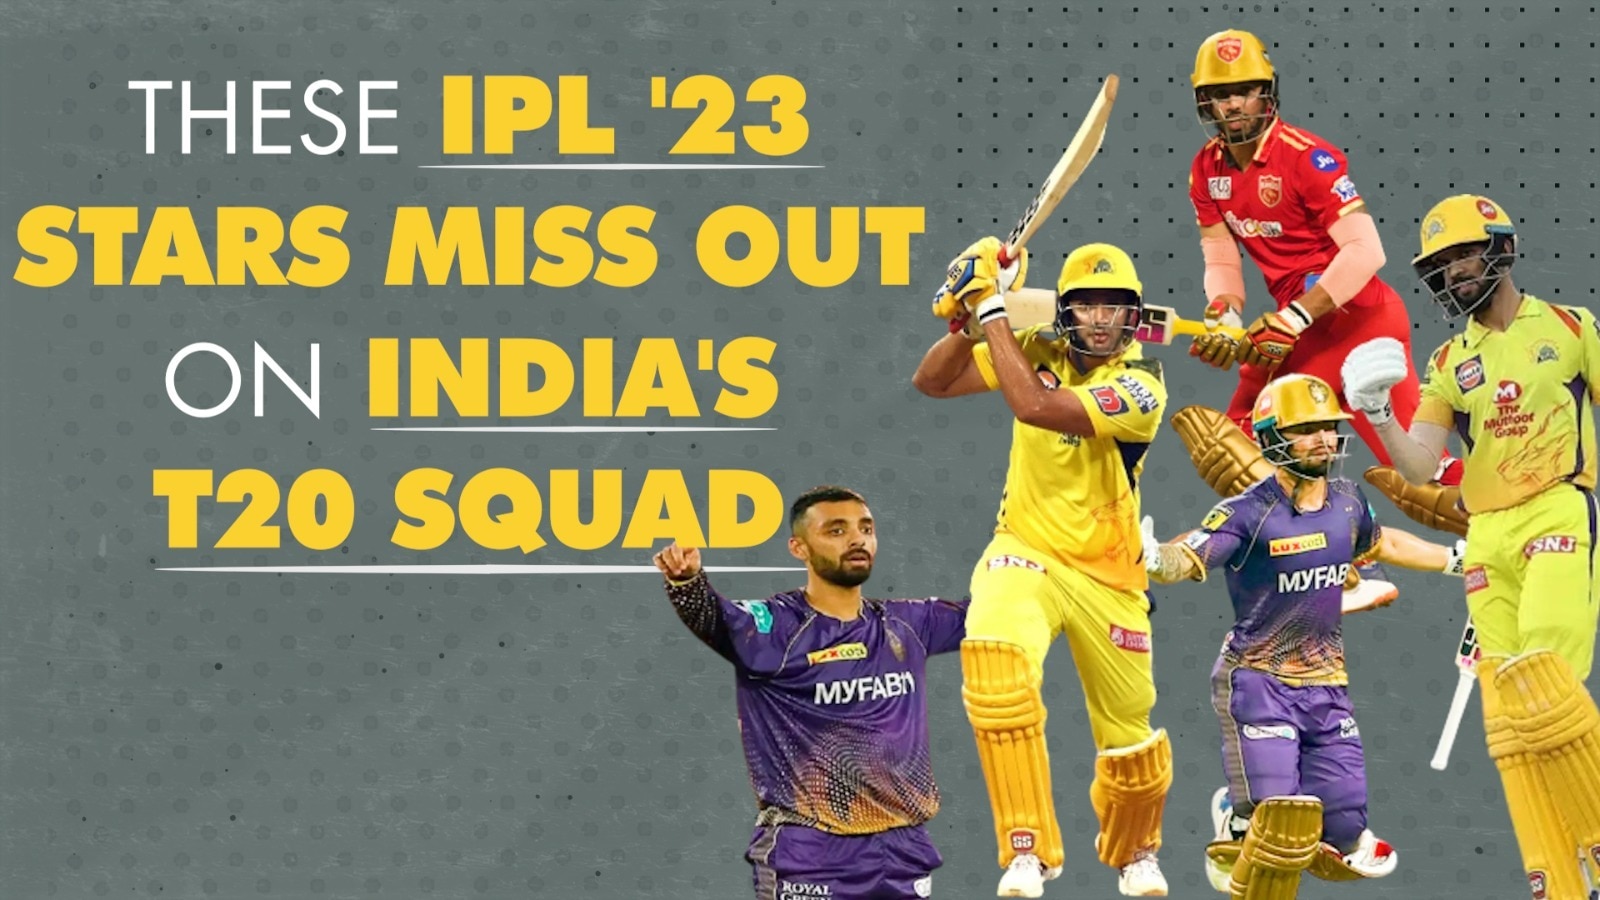 IPL 2023 News Read Latest News and Live Updates on IPL 2023, Photos, and Videos at DNAIndia